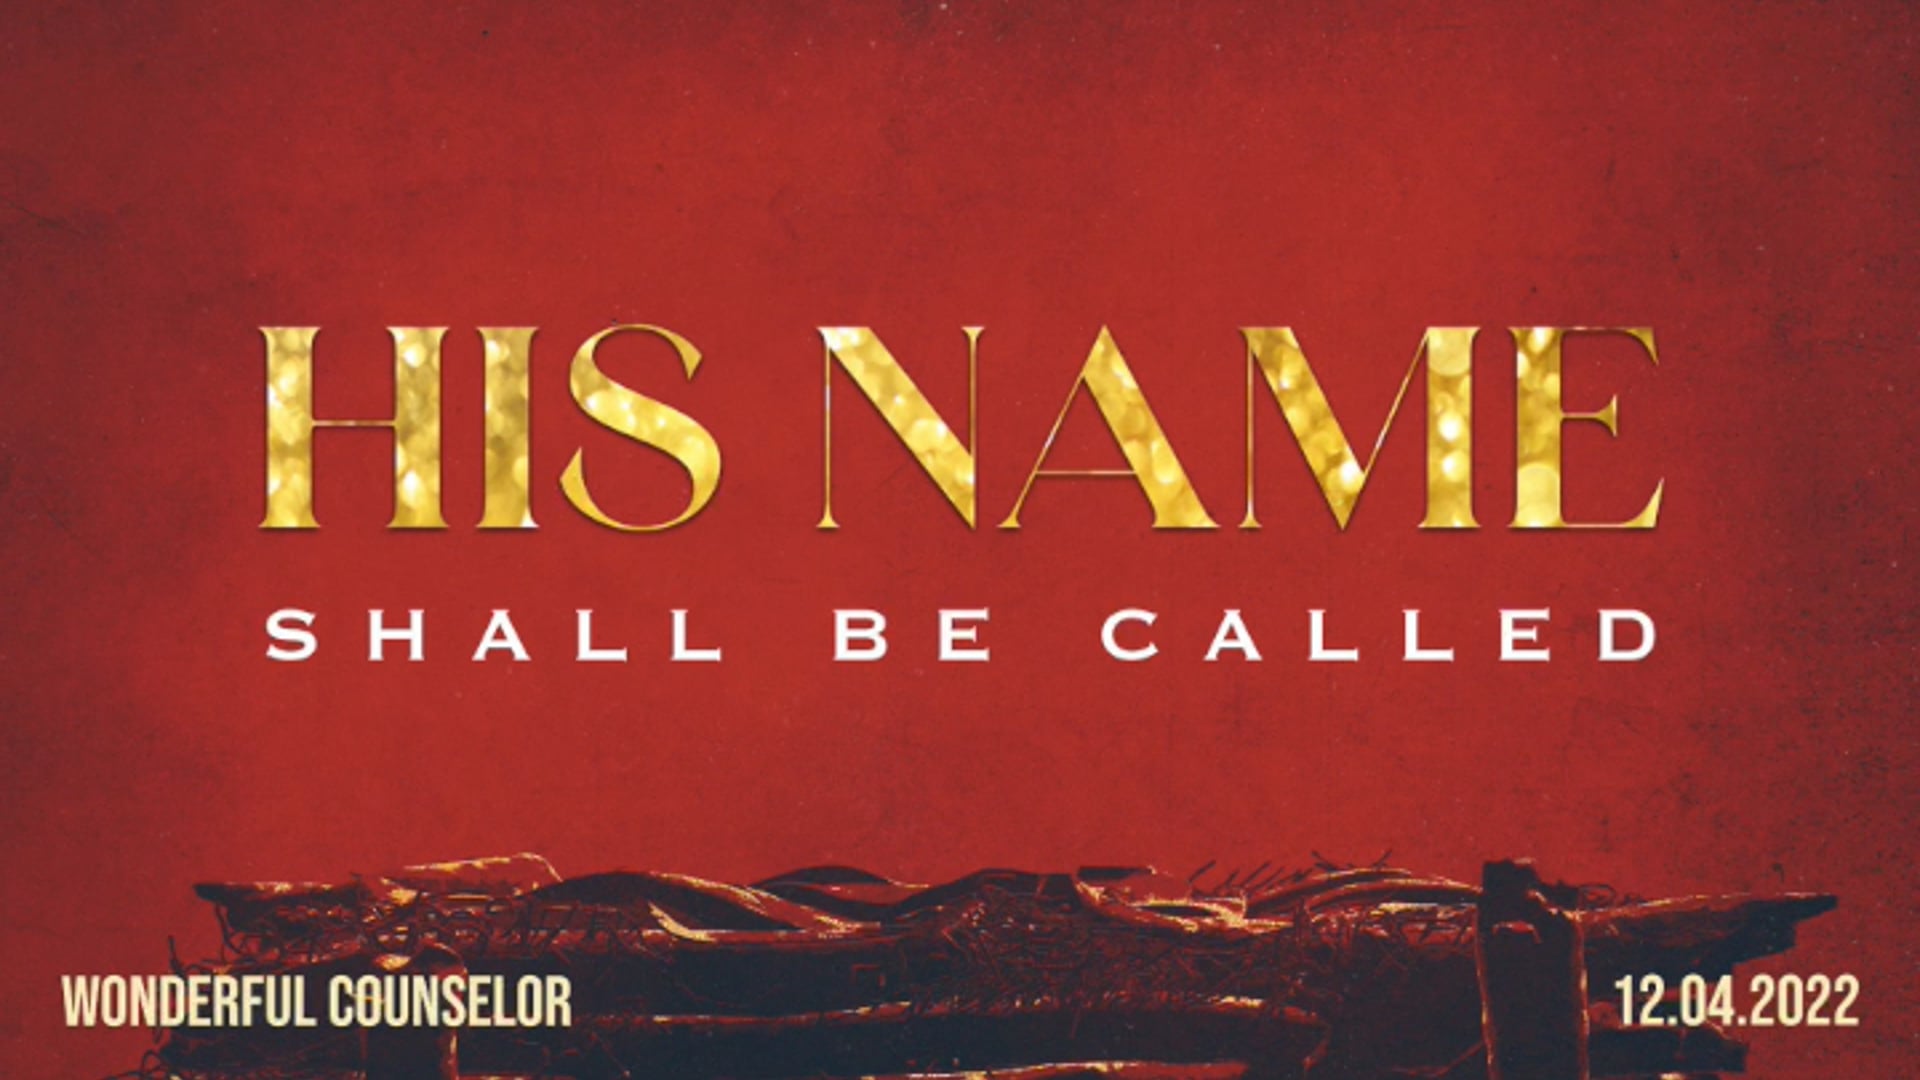 His Name Shall Be Called - Part 1: Wonderful Counselor